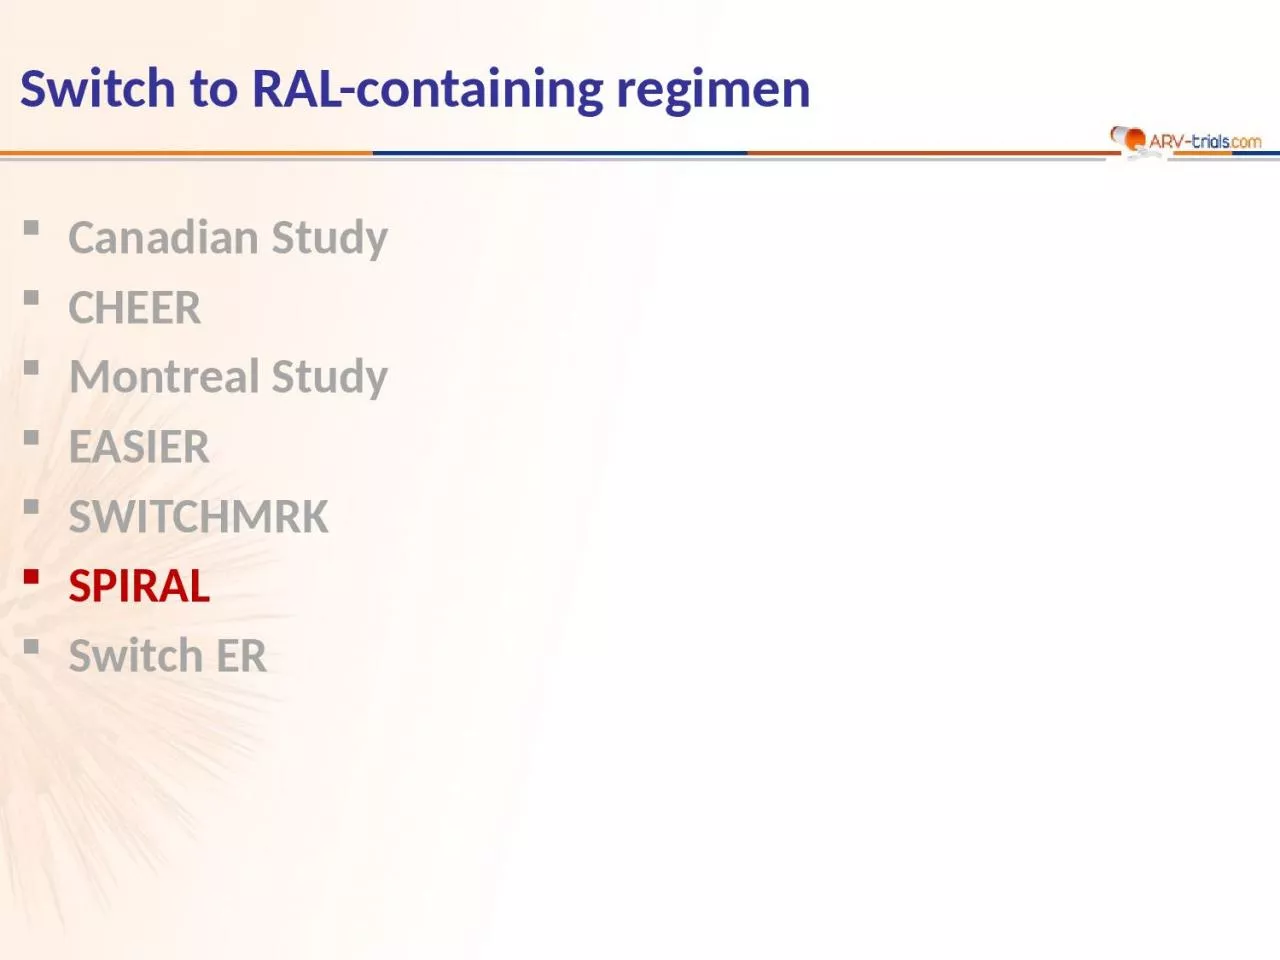 Switch to RAL-containing regimen